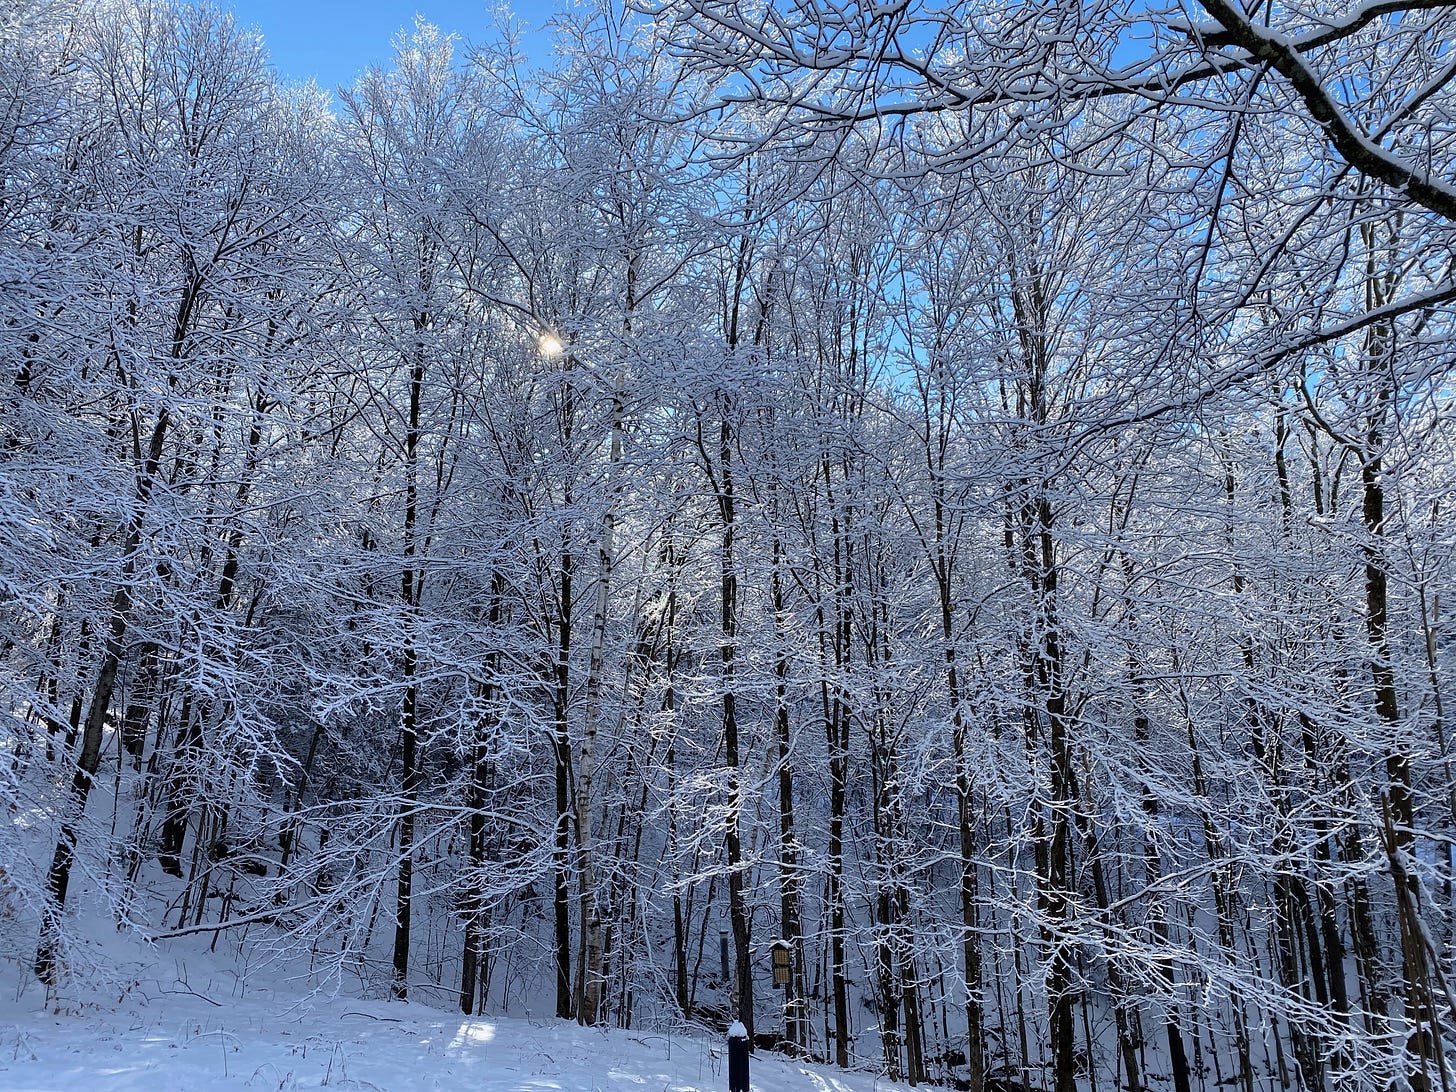 A stand of snow-covered trees glistening white and silver in the sun, which is just visible between the branches.